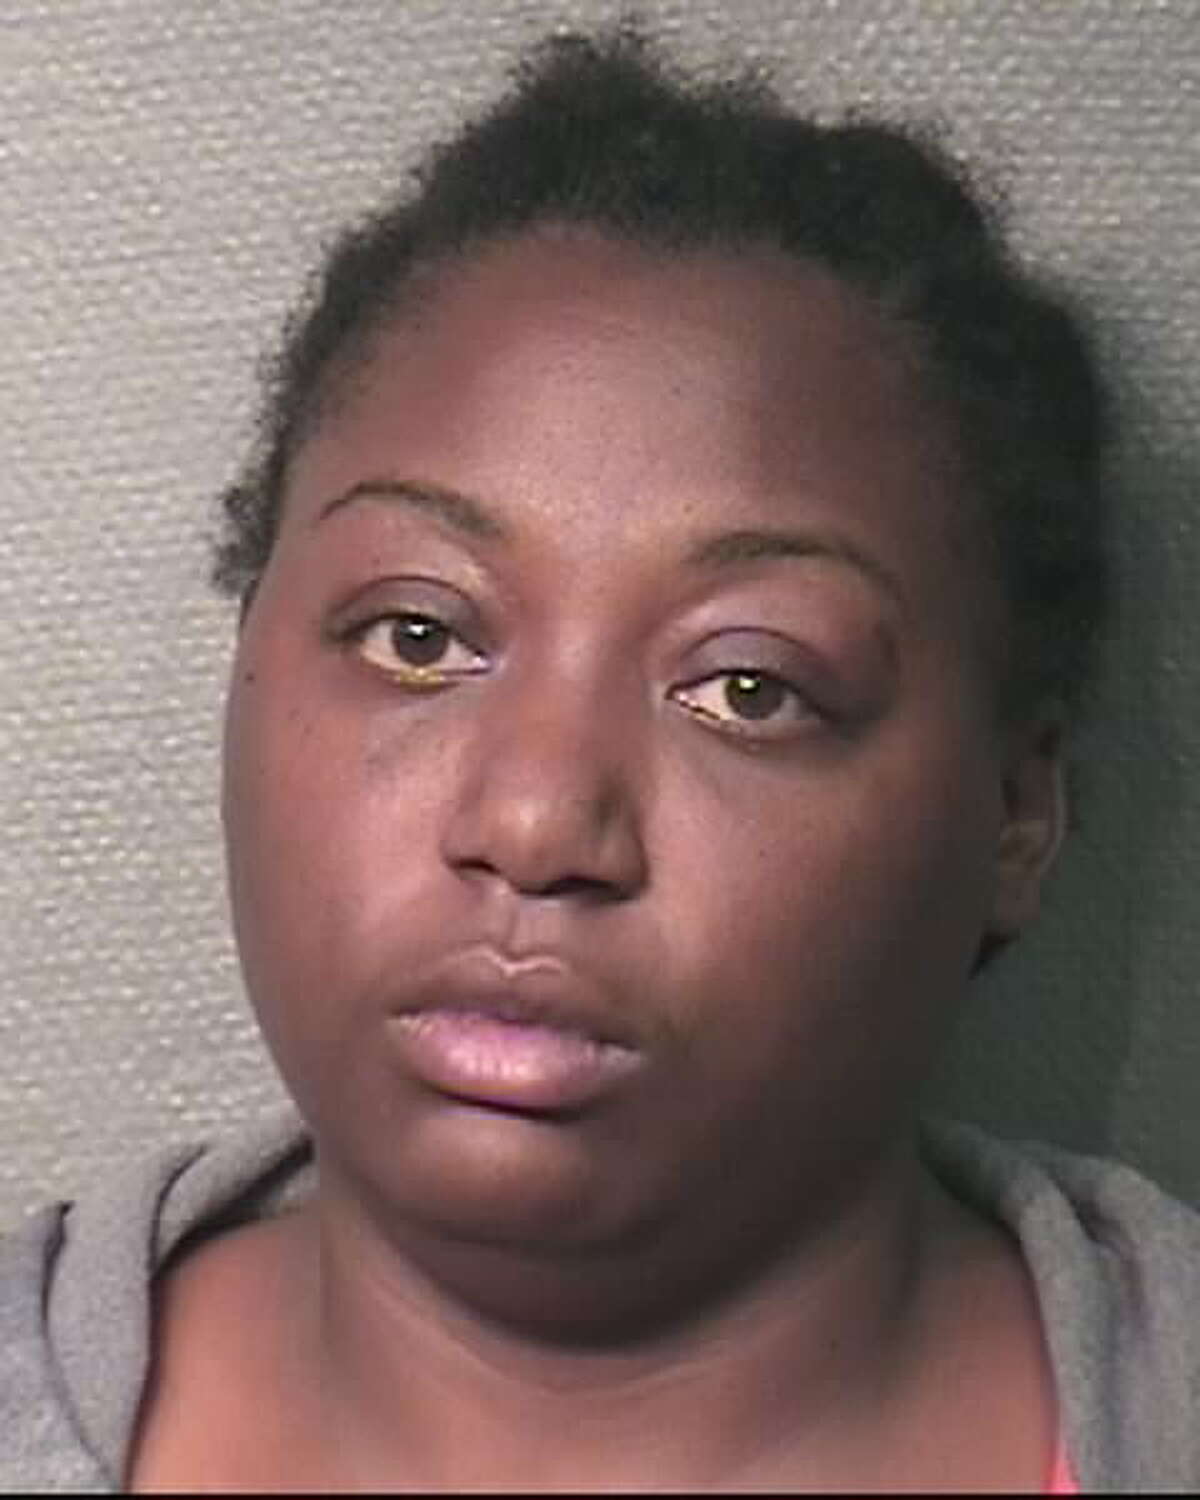 PHOTOS Shandricka Nakesha Mack, 27, is accused of beating 2-year-old Kaliyah McCowan to death at her home in the 5400 block of Rampart Street on Sept. 5, according to the Houston Police Department. >>See those mothers who have been convicted of killing their children in the photos that follow...